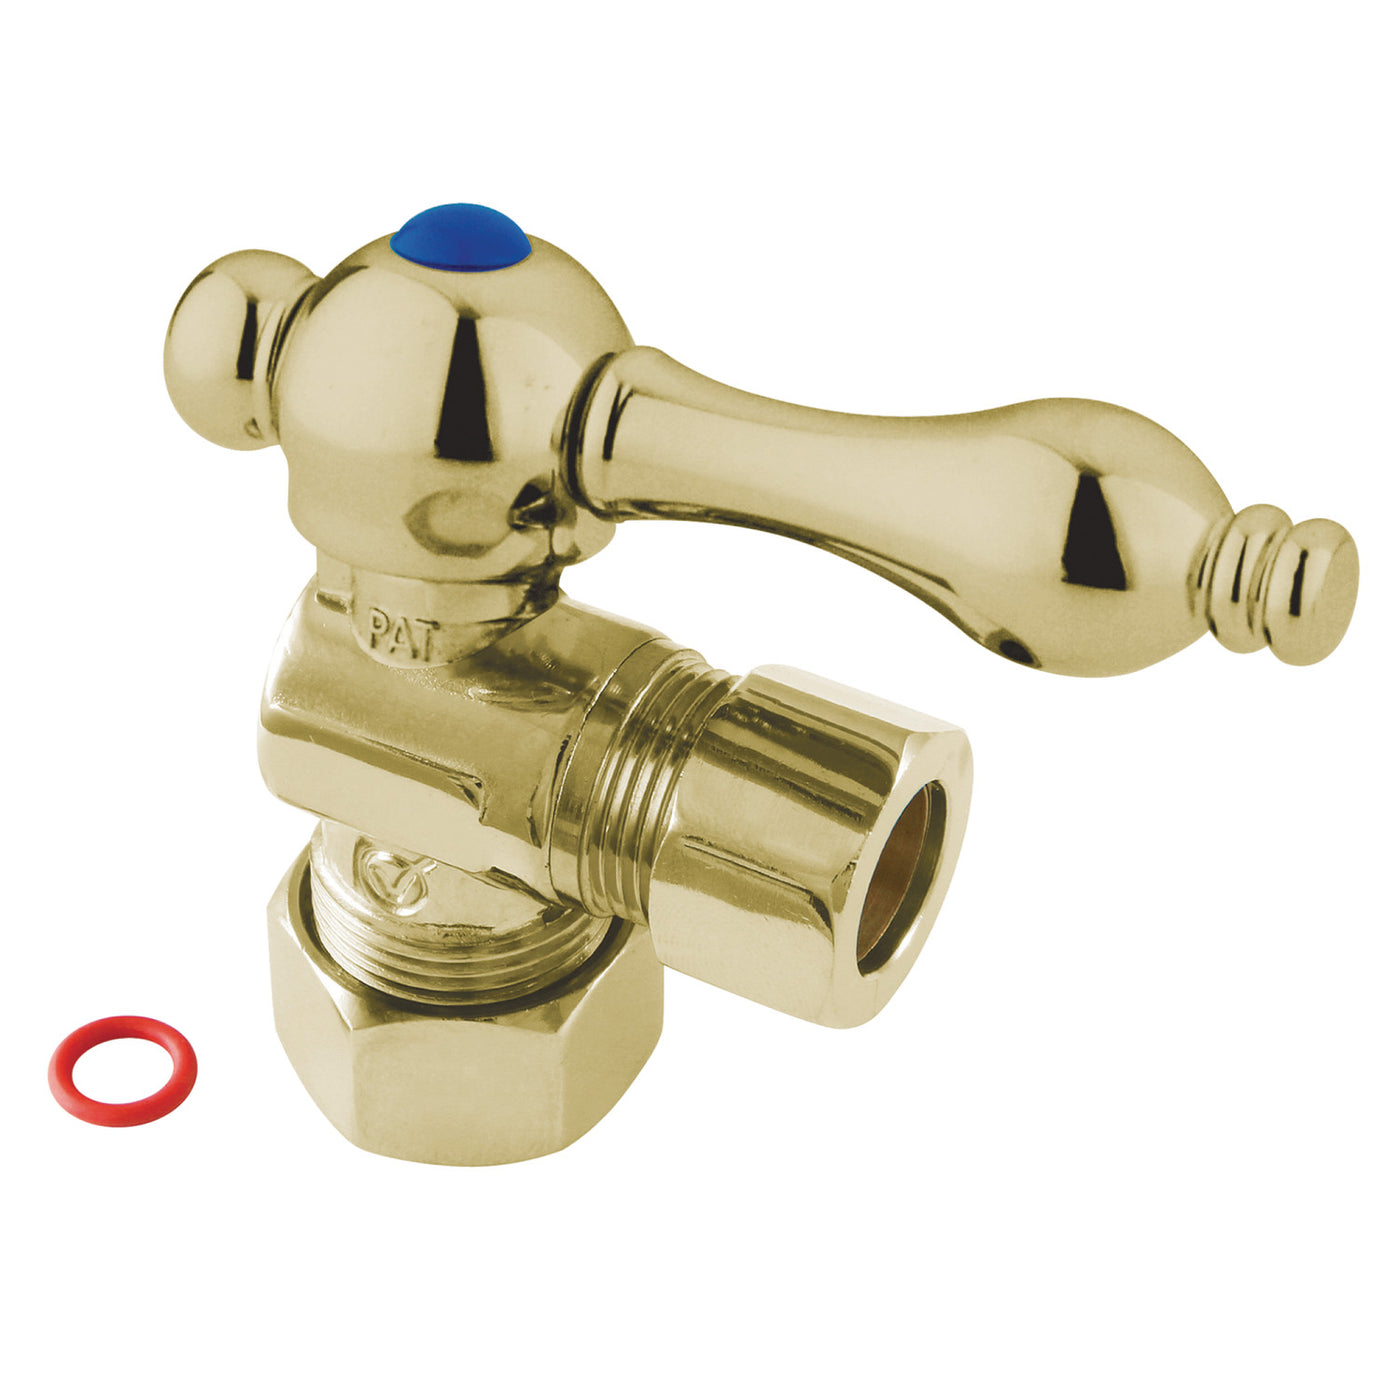 Elements of Design ECC54402 5/8-Inch OD Comp x 1/2-Inch OD Comp Angle Stop Valve, Polished Brass